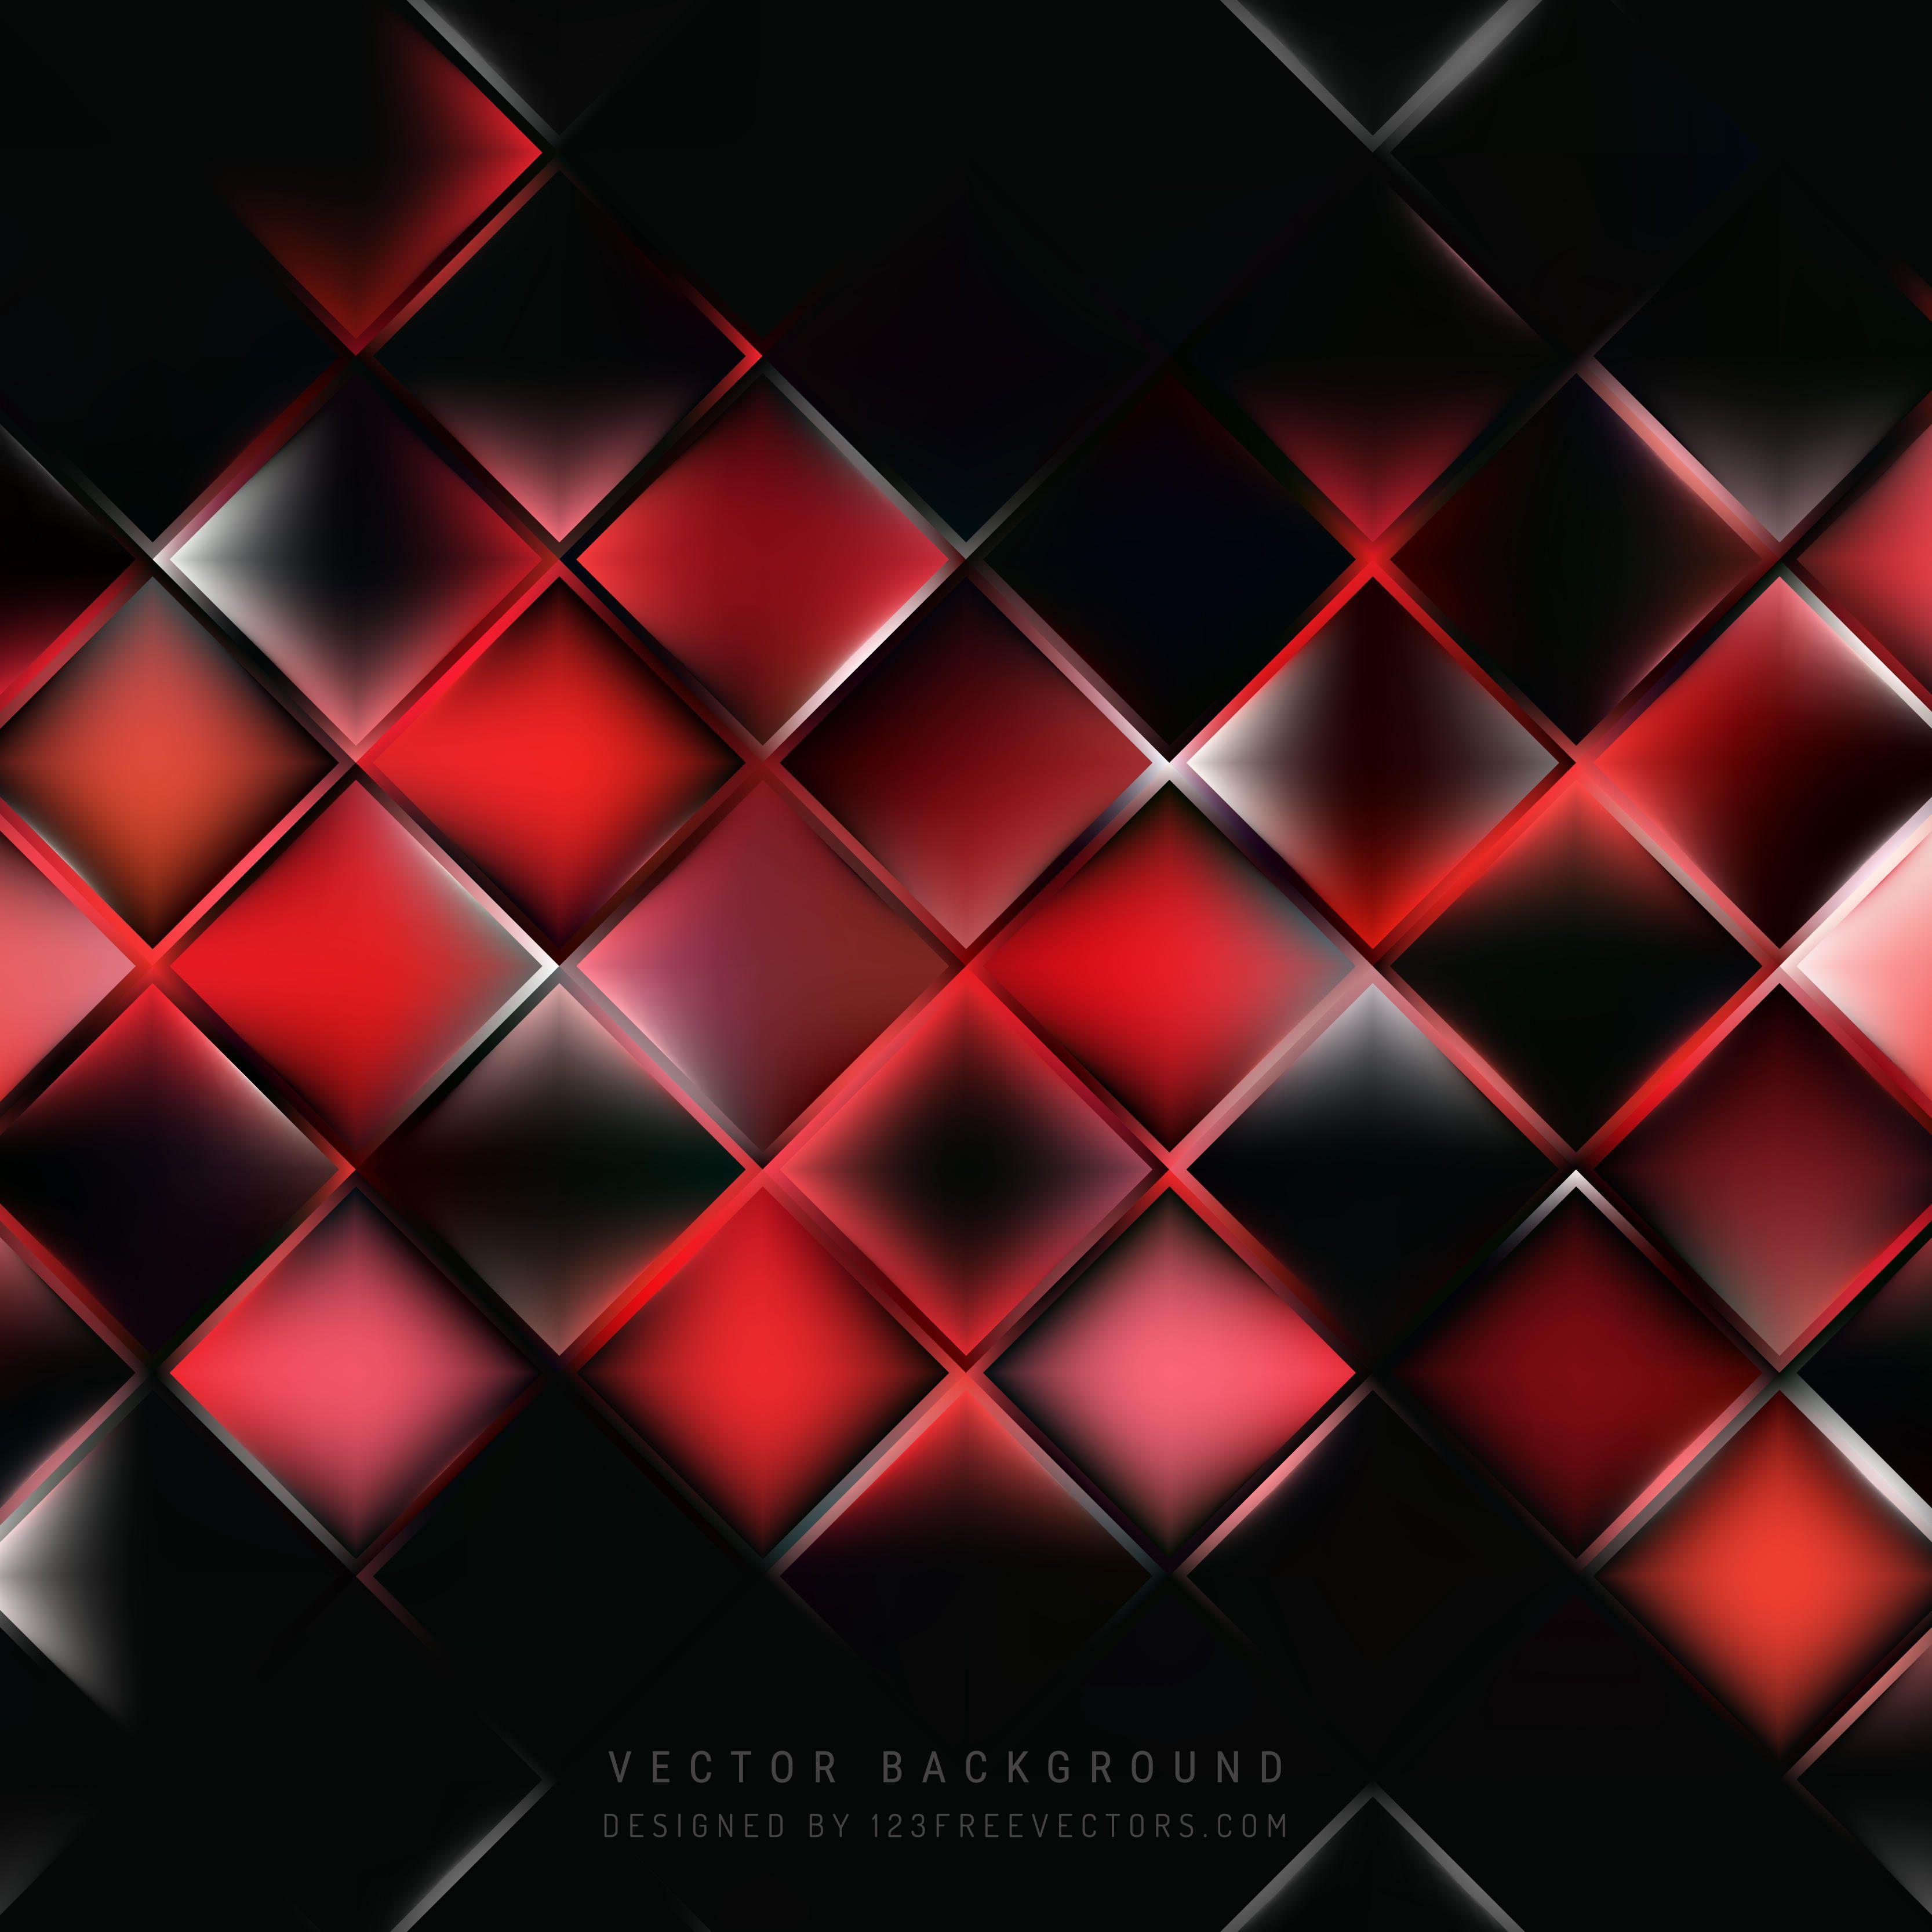 Abstract Red Black Square Background PatternFreevectors